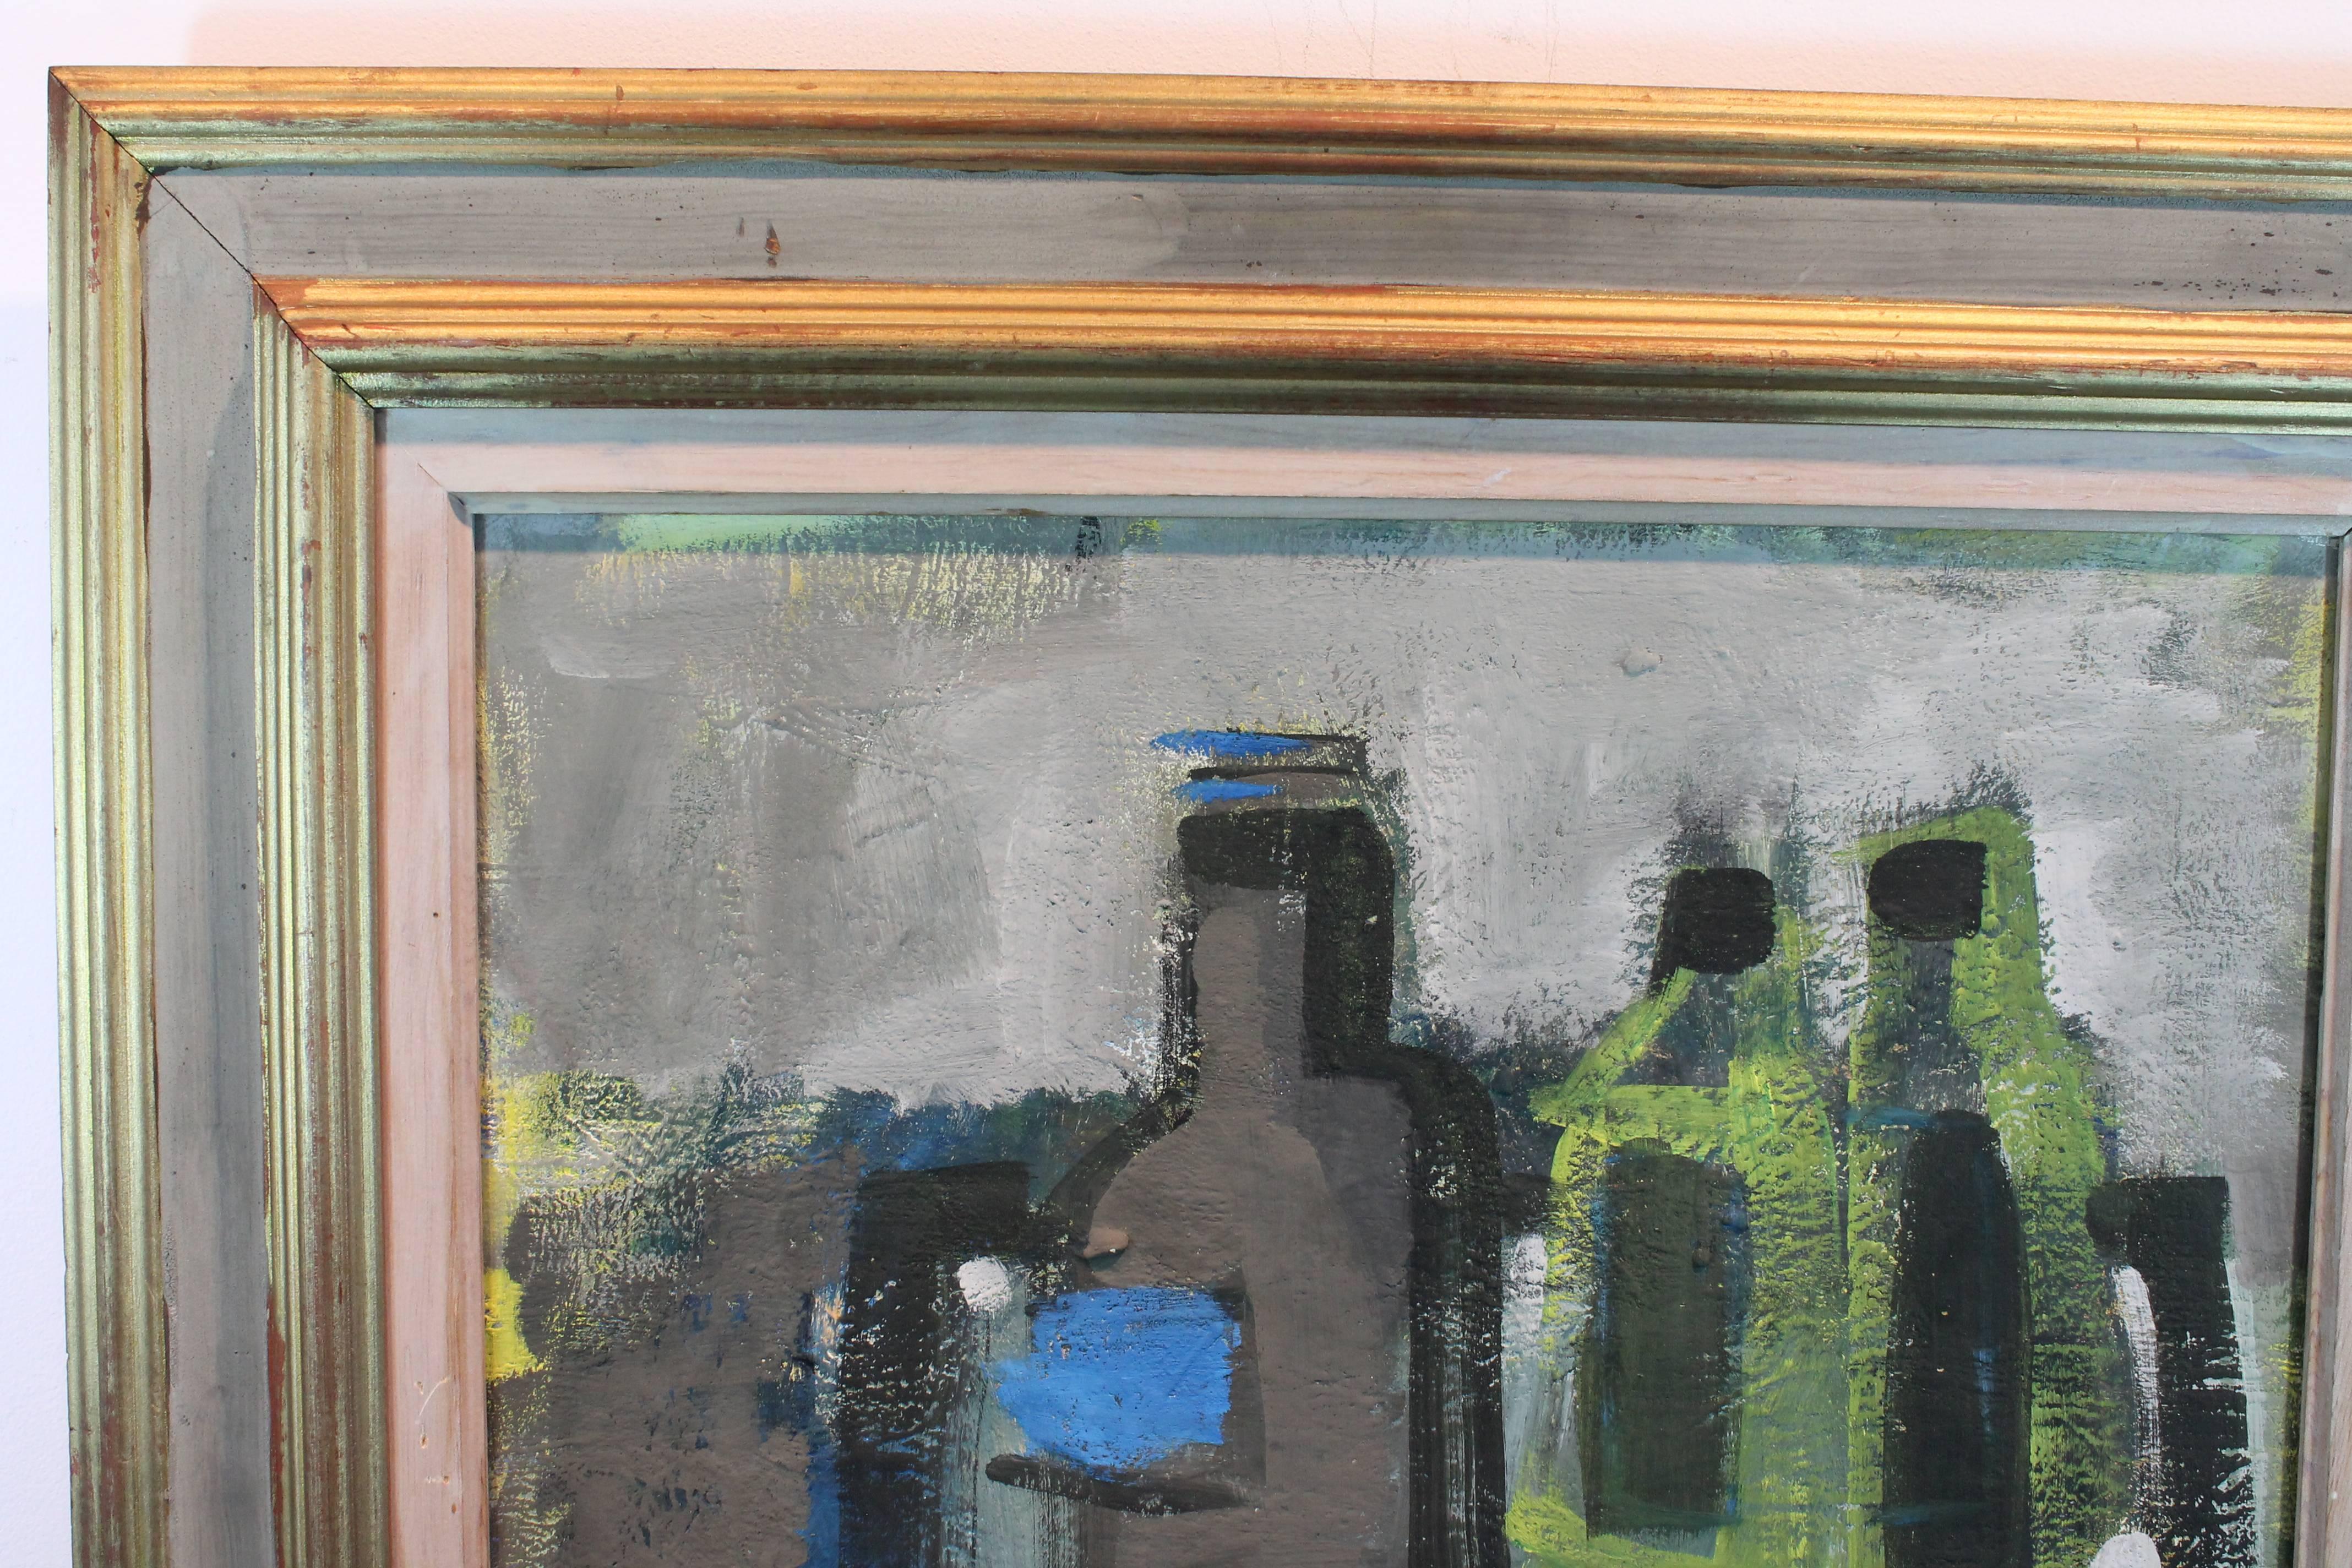 Signed H. Wickman, 1950 abstracted gestural still life painting on board in original gilt frame.
Stockholm gallery tags en verso.